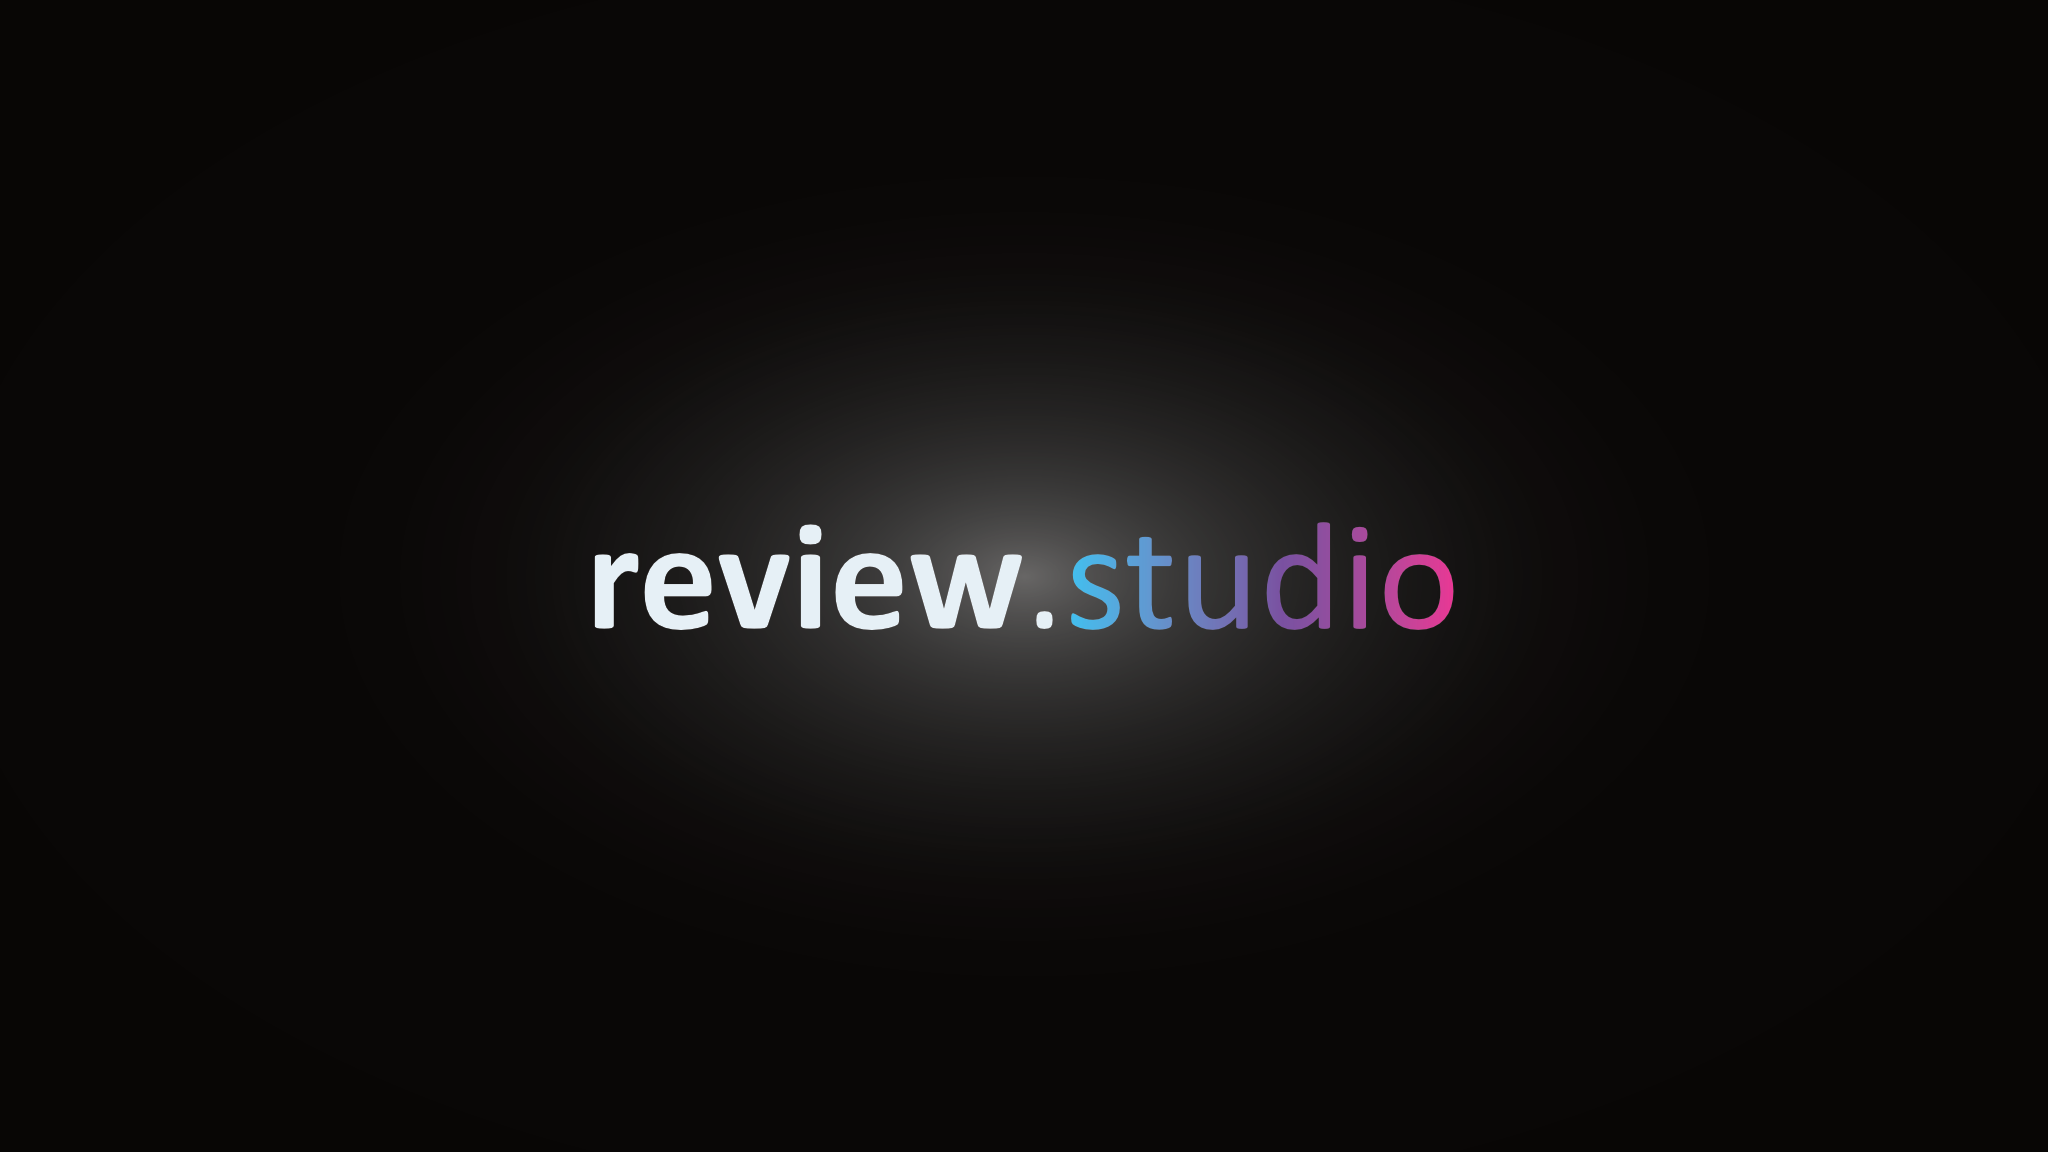 About review.studio